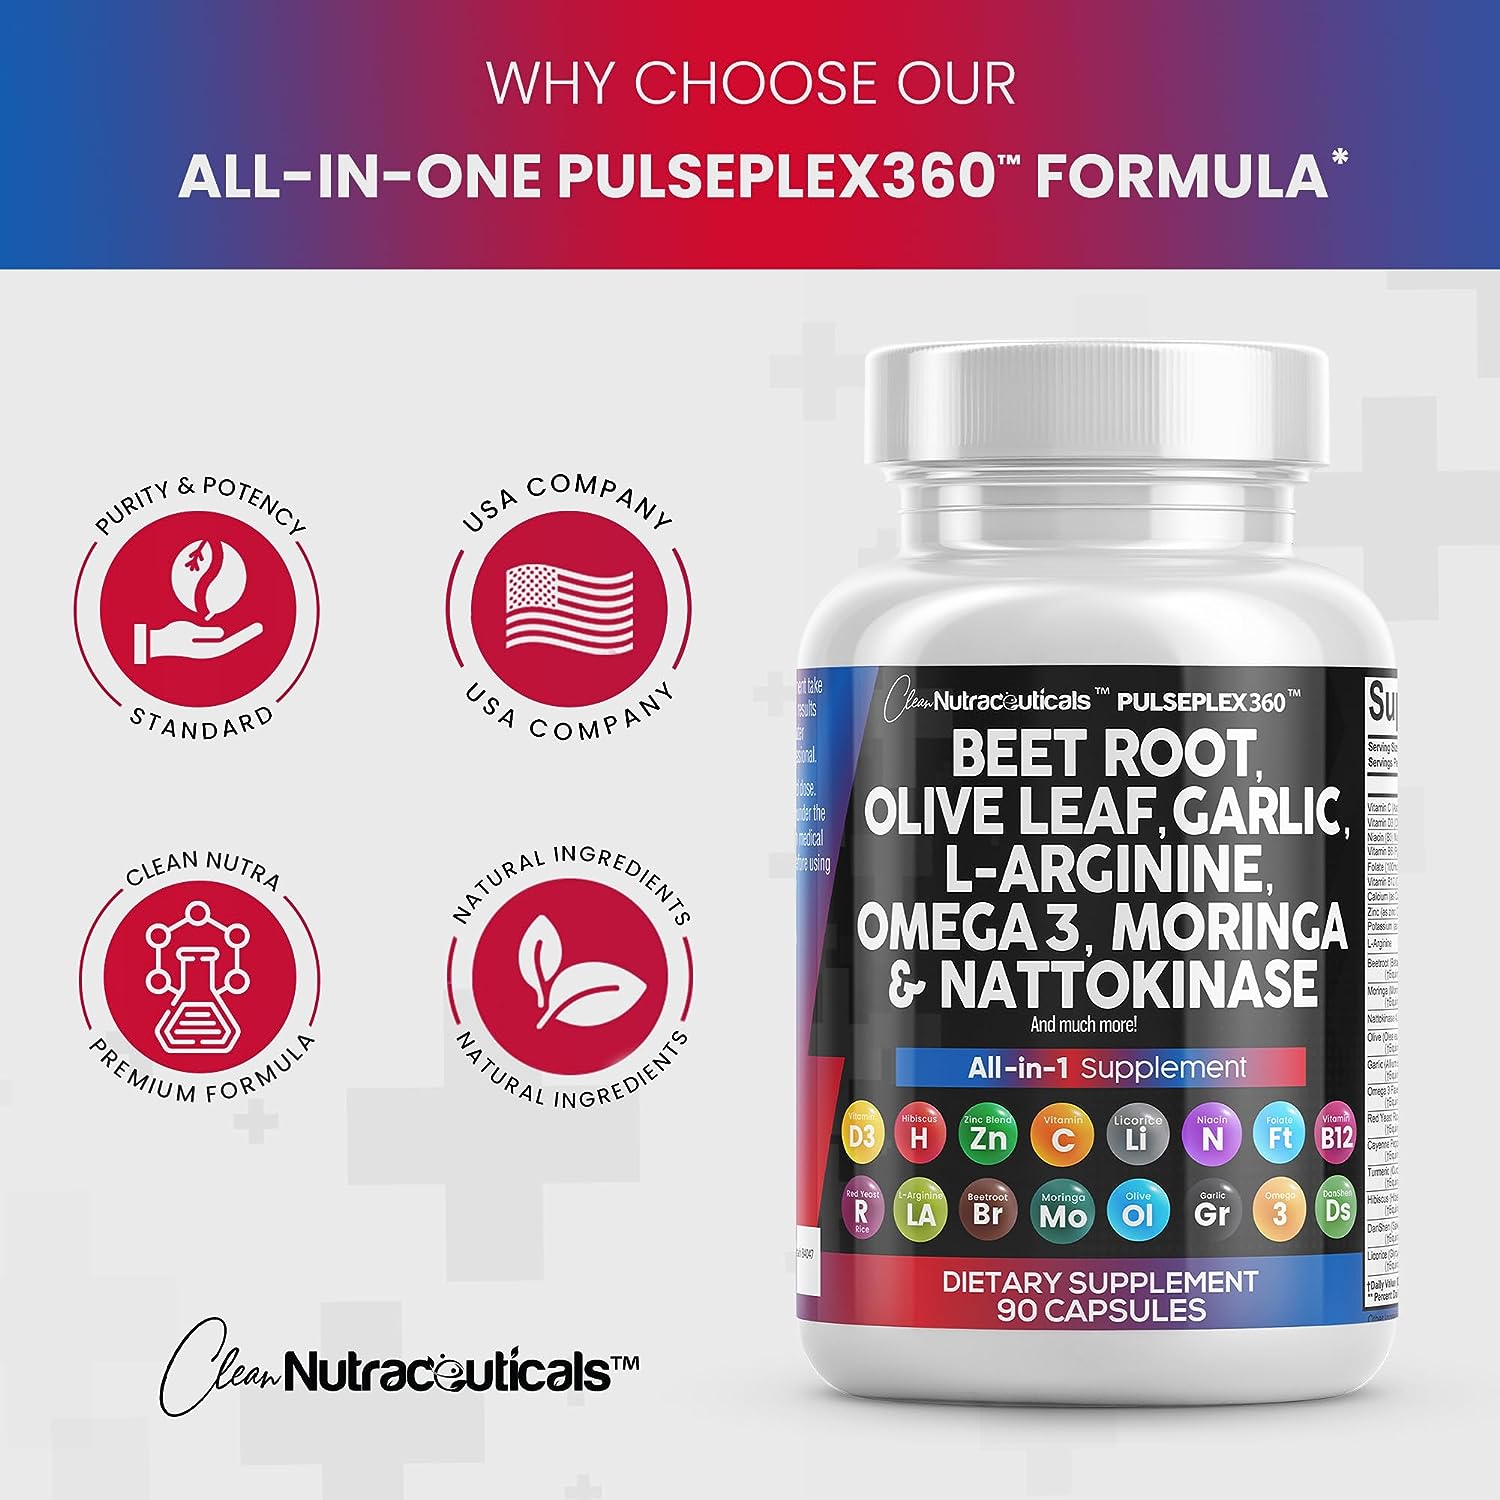 Beet Root Capsules 6000mg Olive Leaf 6000mg Nattokinase 4000 FU Garlic Extract 2000mg L-Arginine 400mg Omega 3 Red Yeast Rice Hibiscus Danshen - Healthy Support Supplement - USA Made